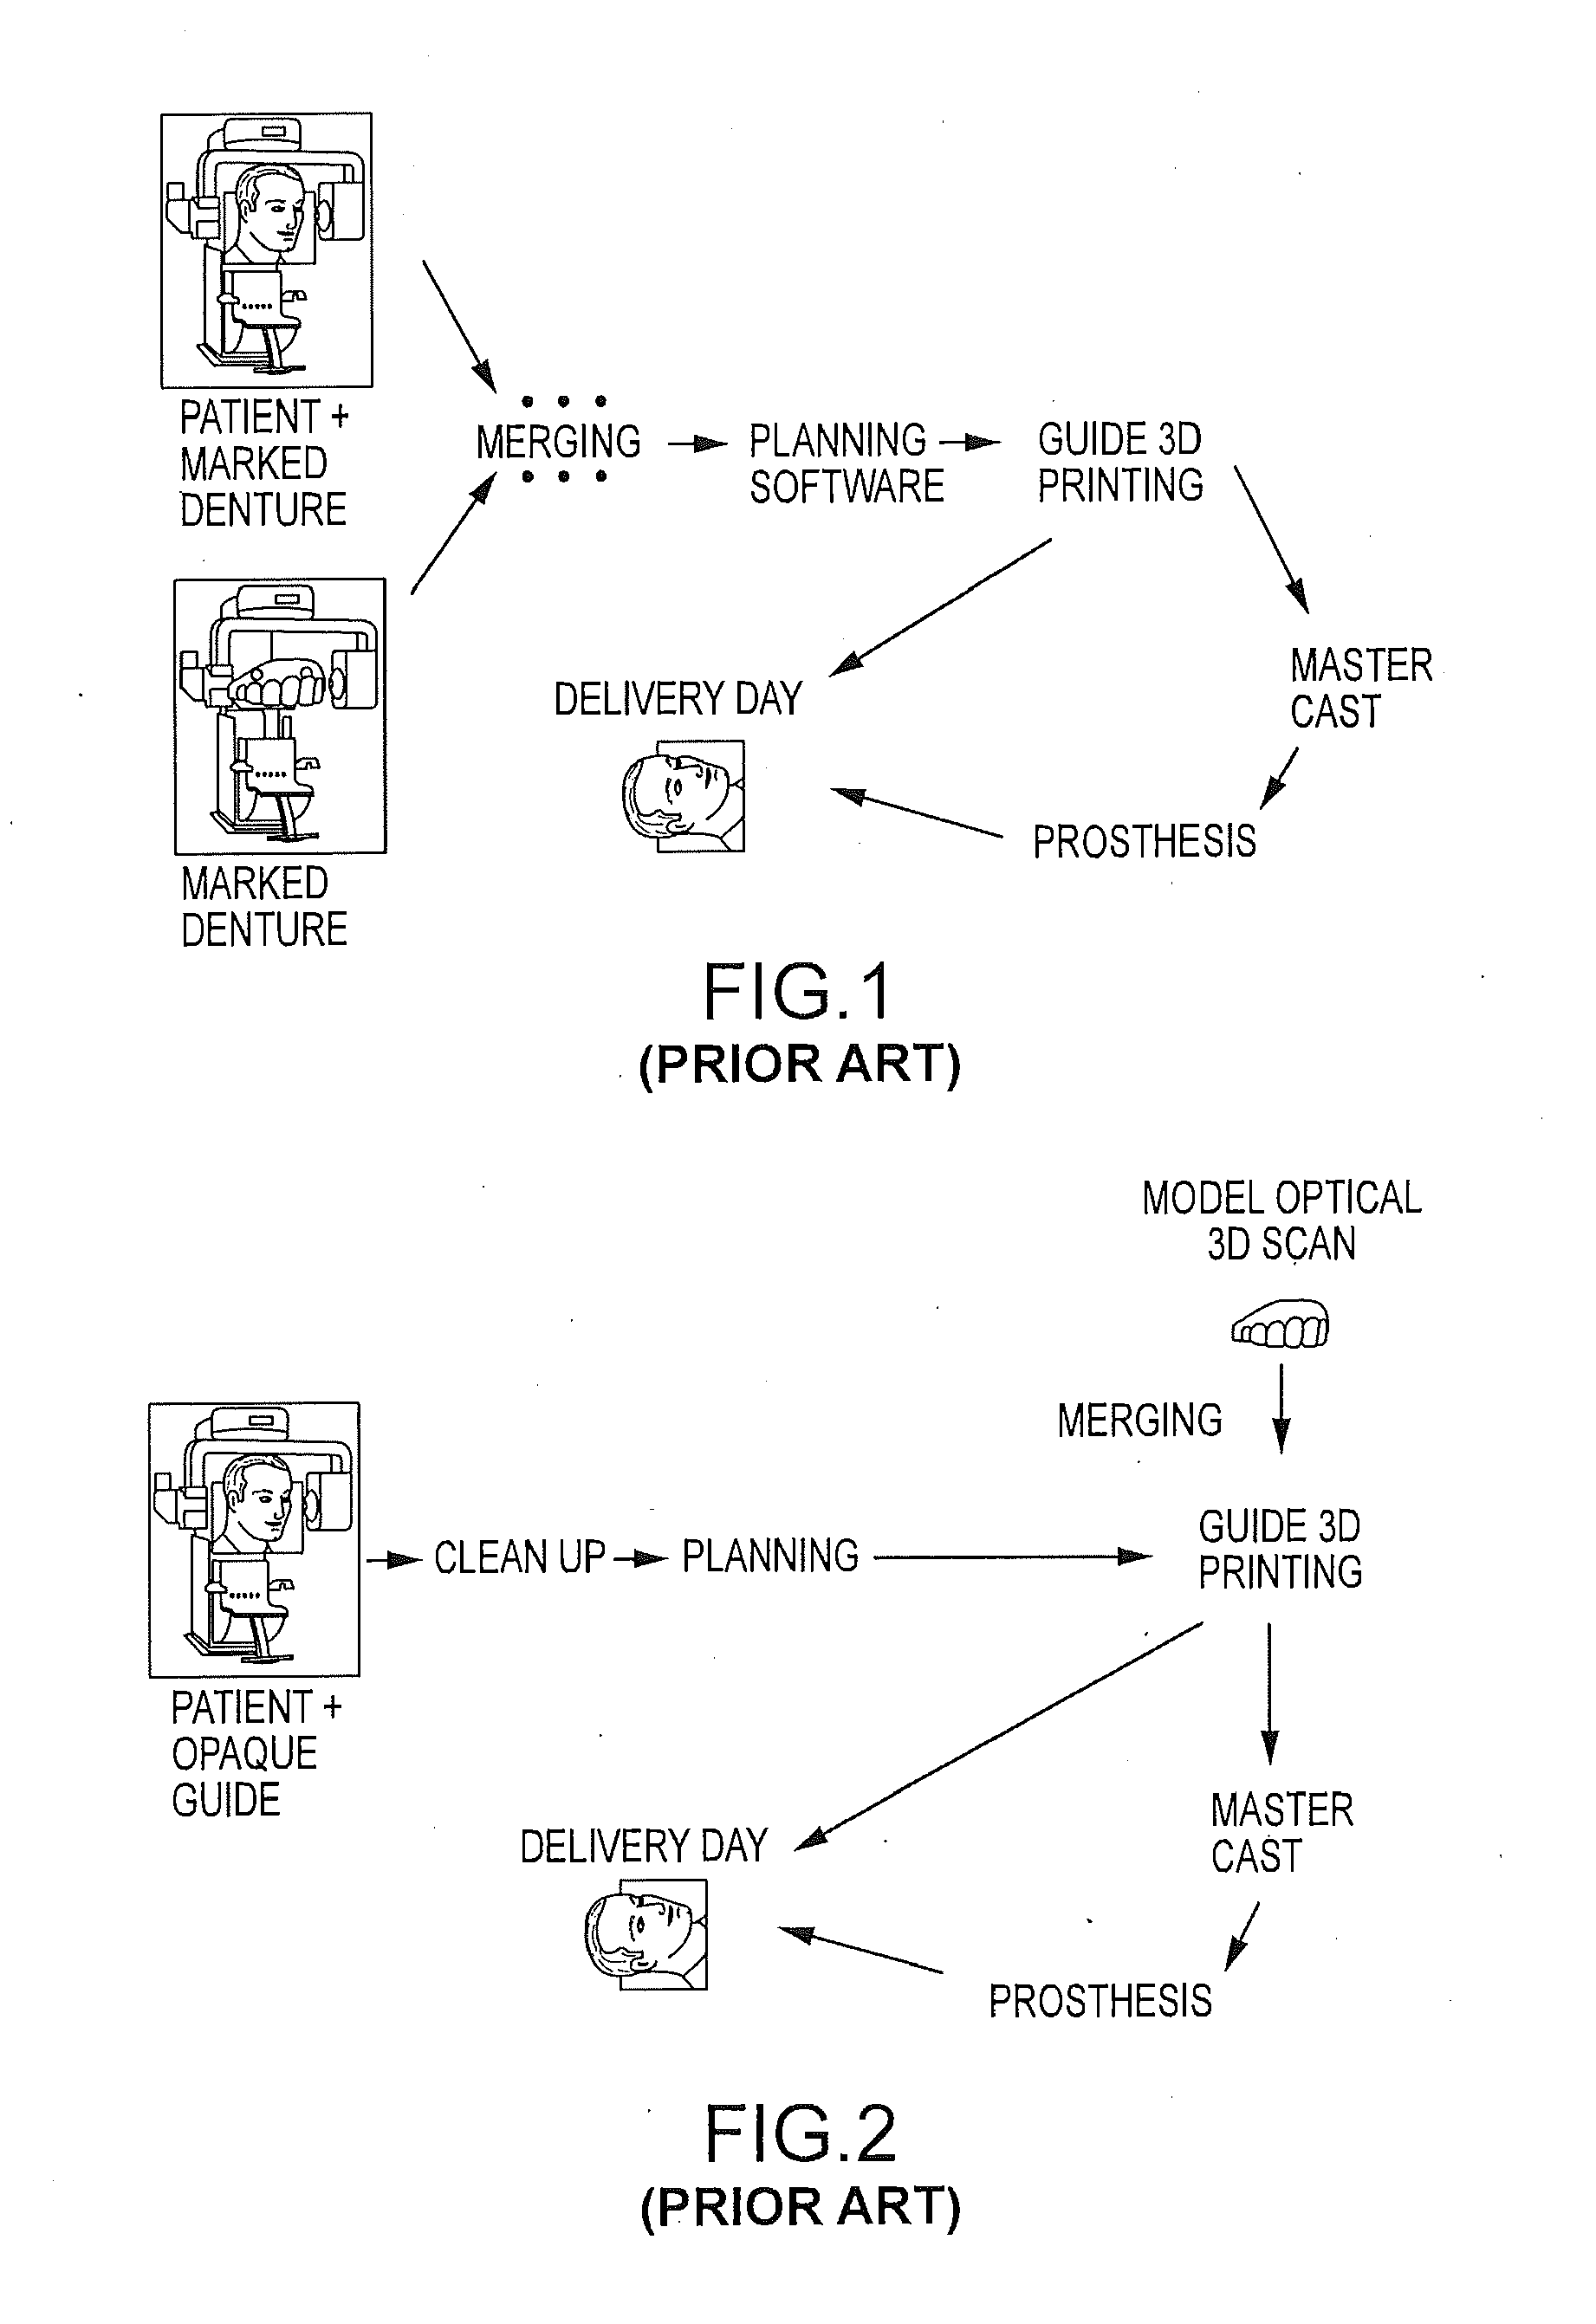 Assisted dental implant treatment and replication system